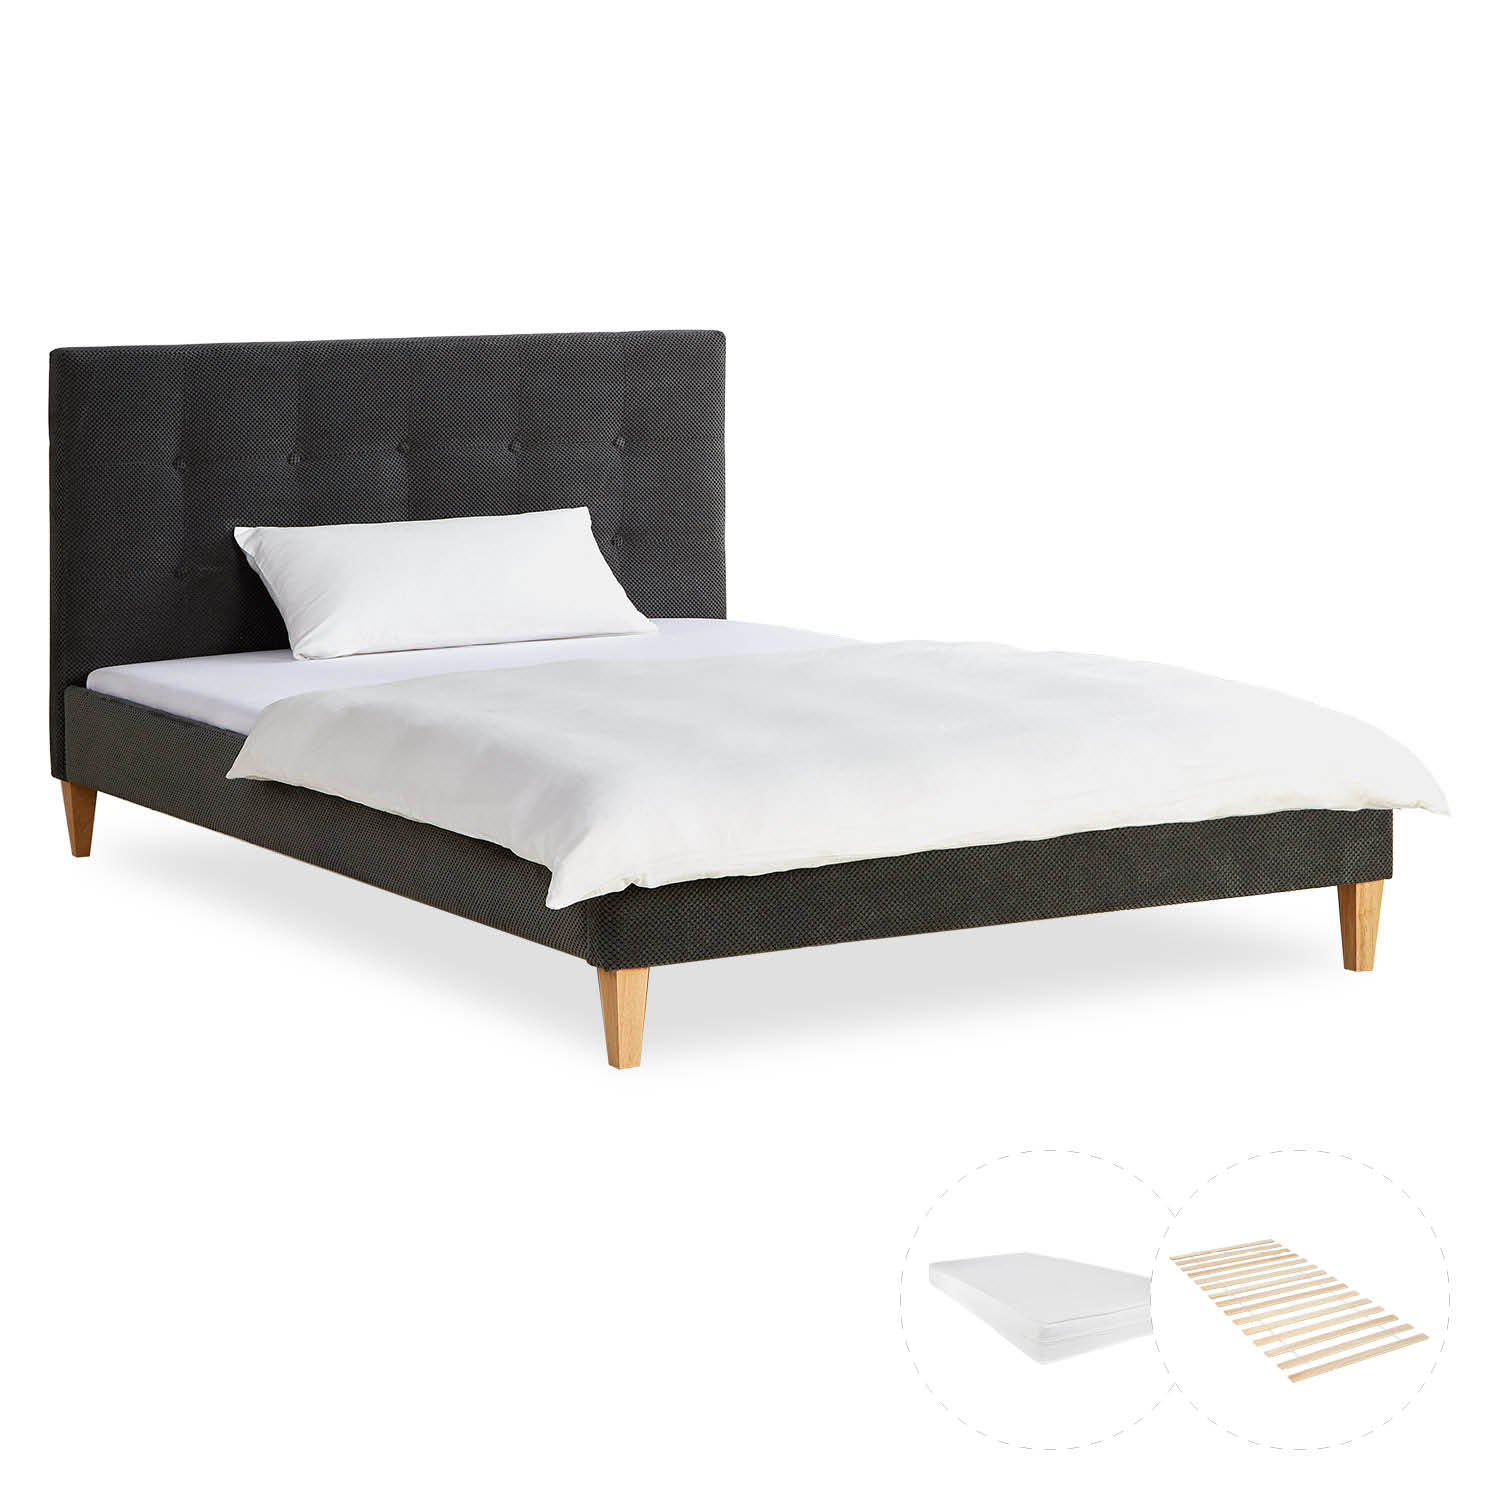 Small Double Bed 140x200 cm with Mattress Anthracite Velvet Upholstered Bed with Slatted Frame Fabric Bed Frame Grey